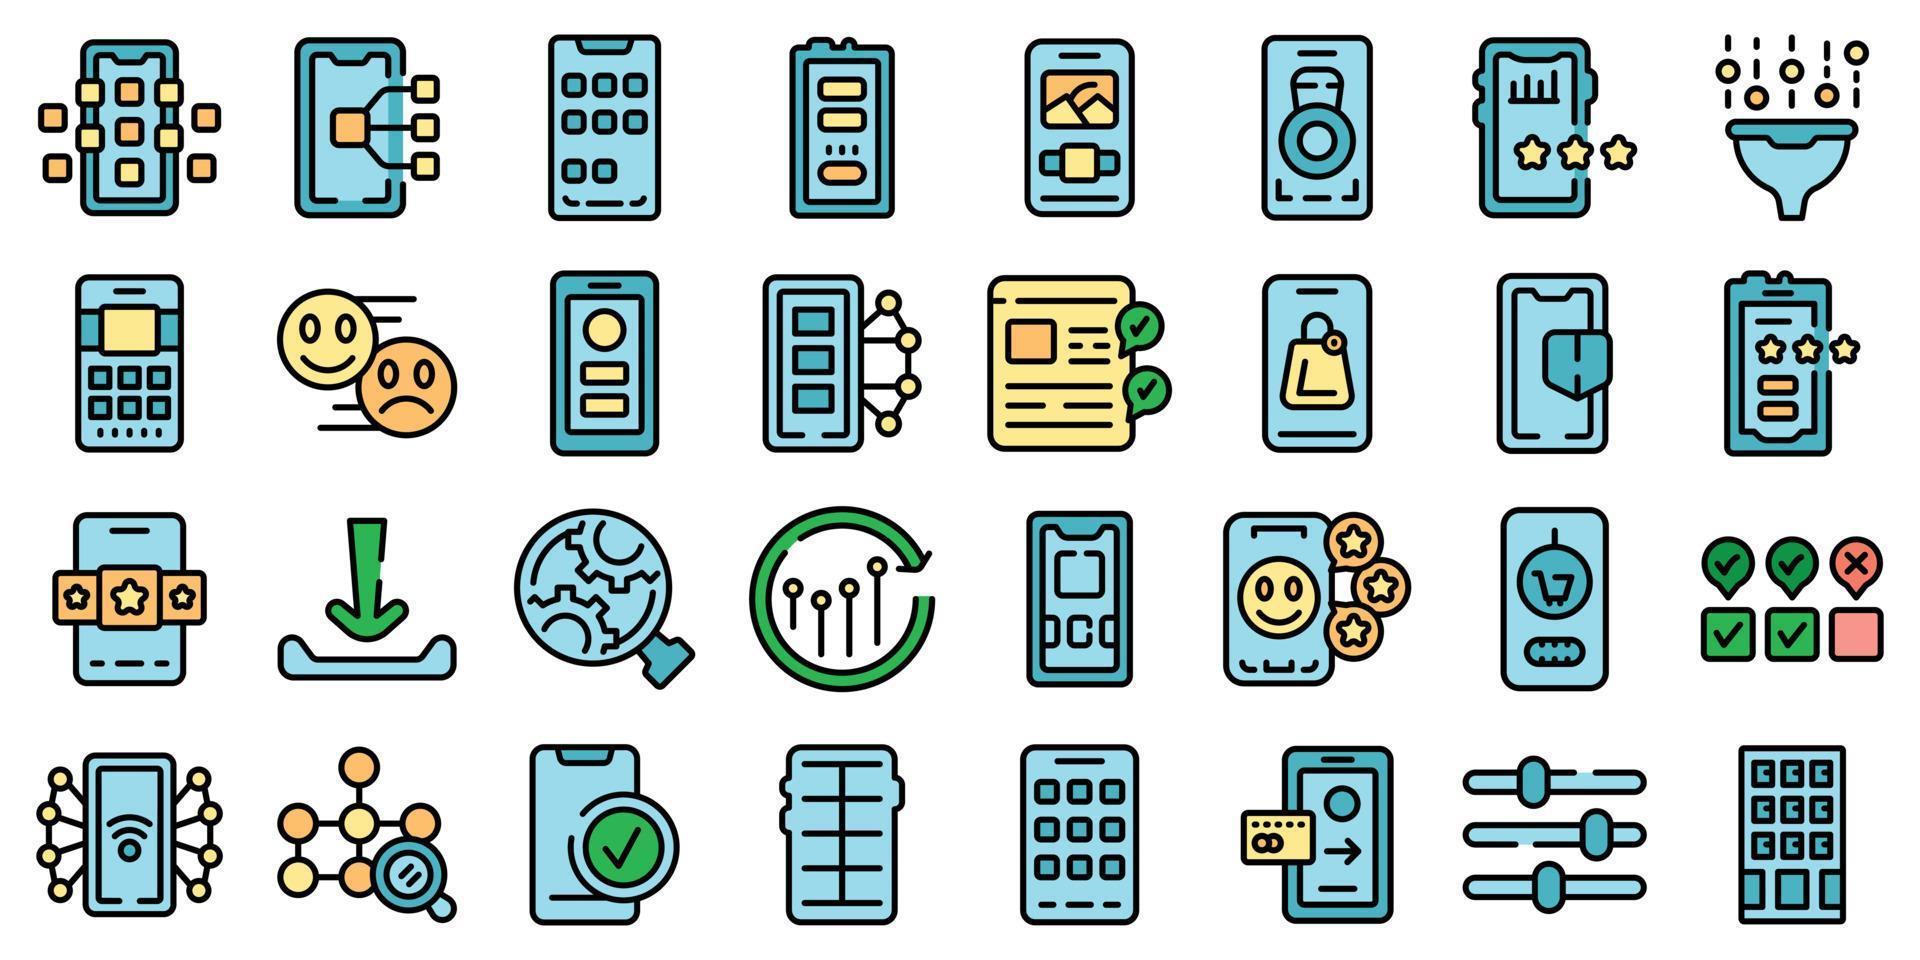 Mobile apps icons set vector flat